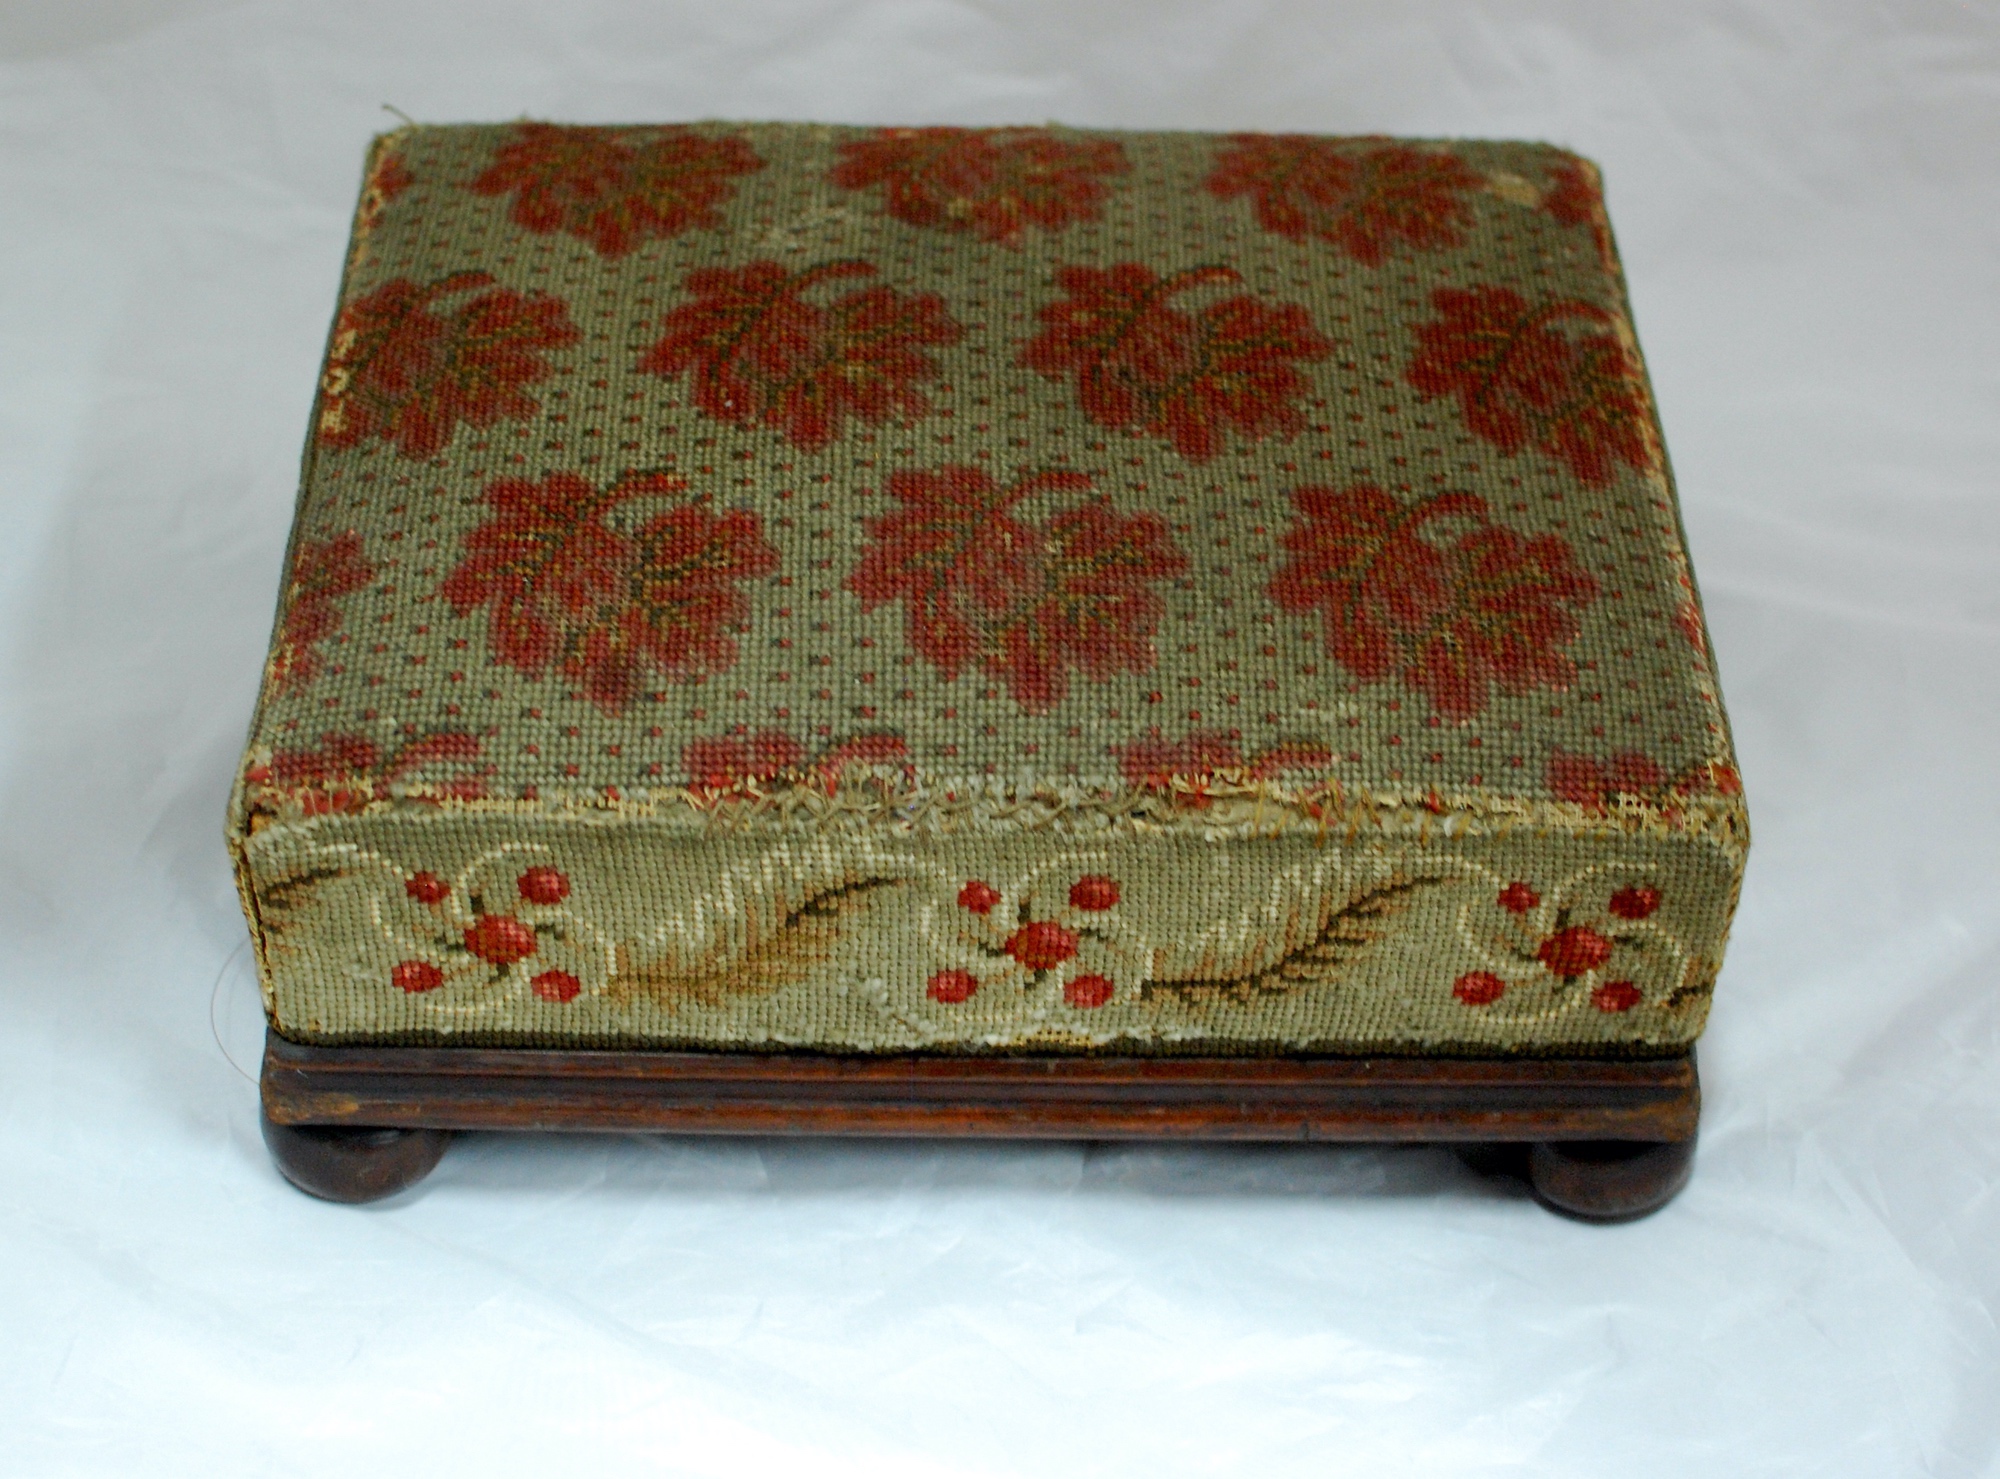 Wooden footstool with embroidered cushion. It is embroidered with a red flower pattern.